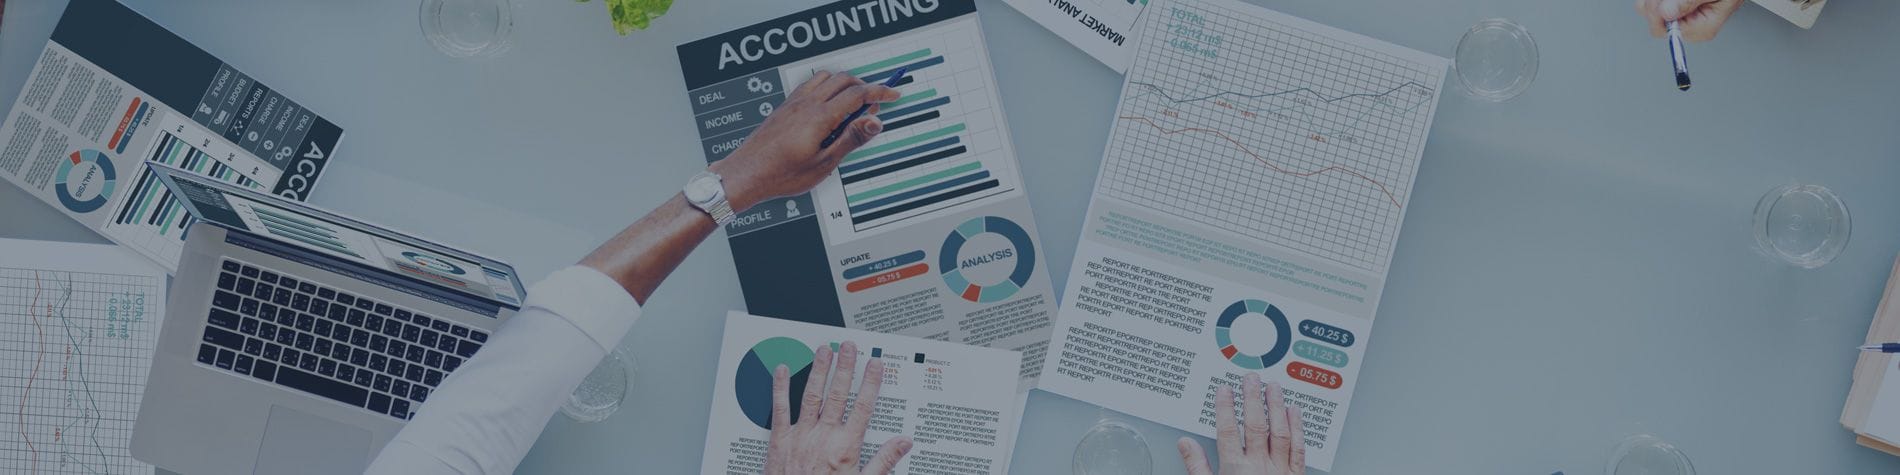 Accounting Services Overview | Walters Accountants